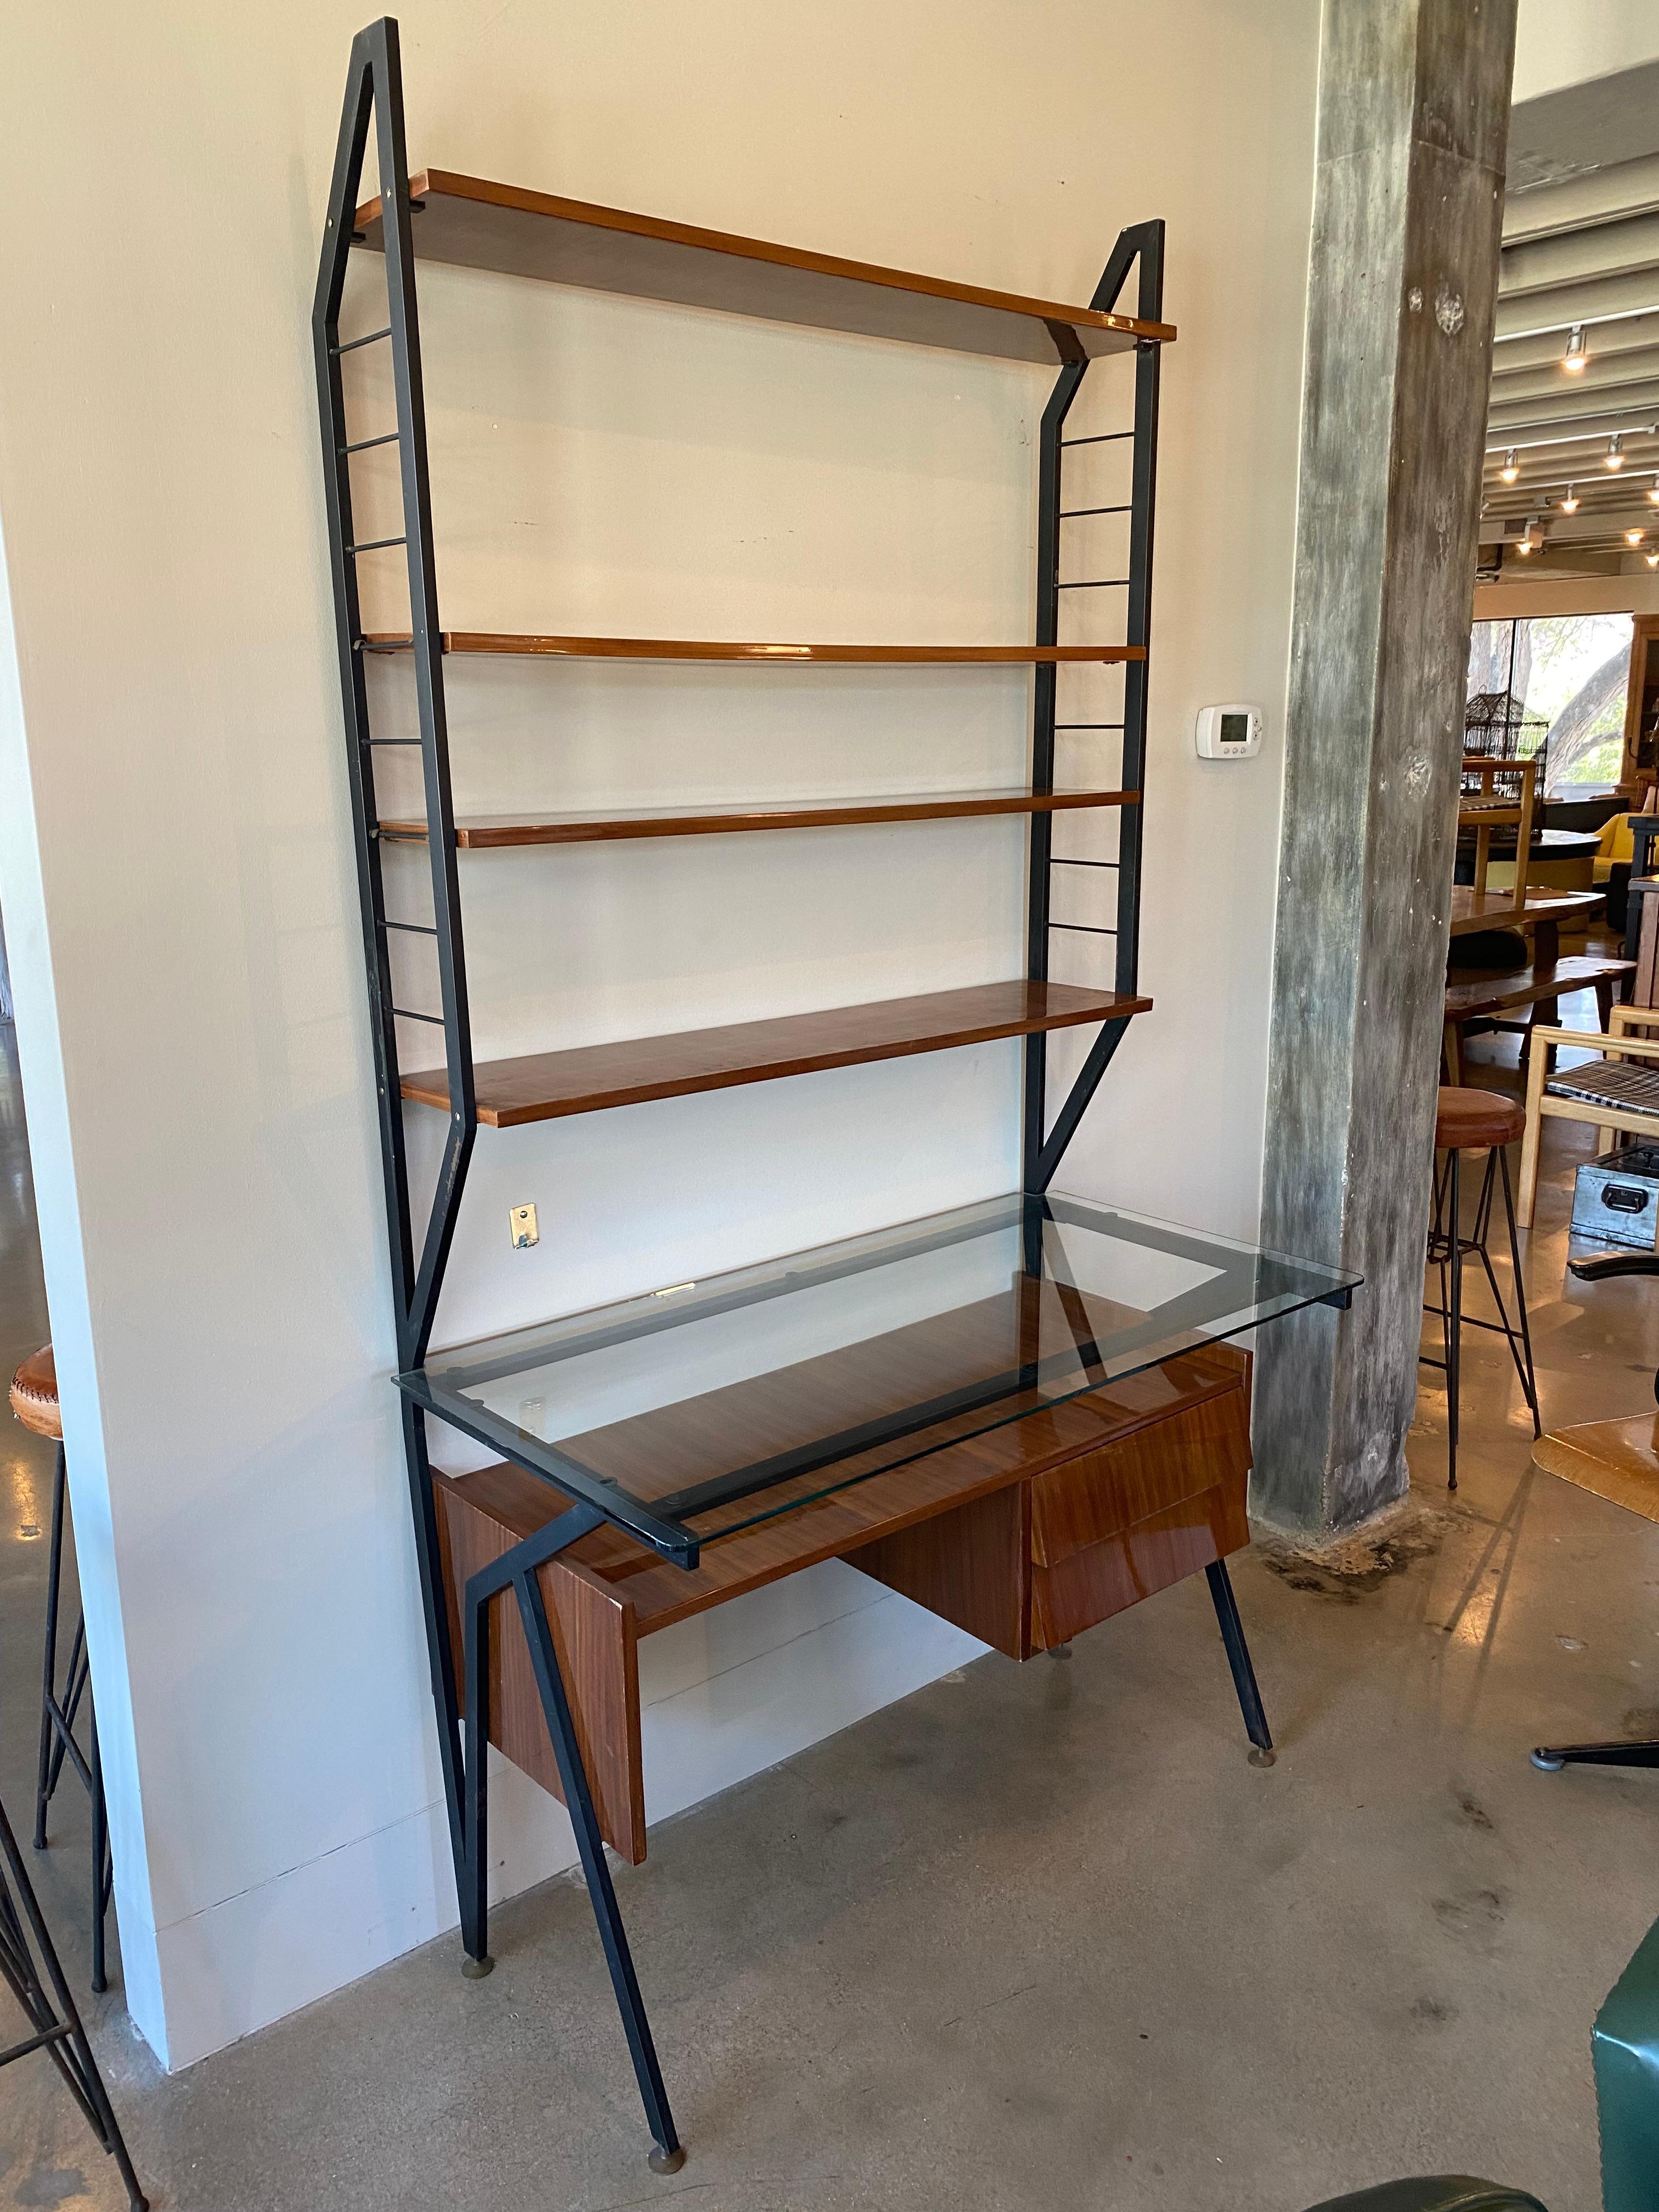 Italian Mid-Century Modern Desk with Shelves, Style of Ico Parisi In Good Condition For Sale In Austin, TX